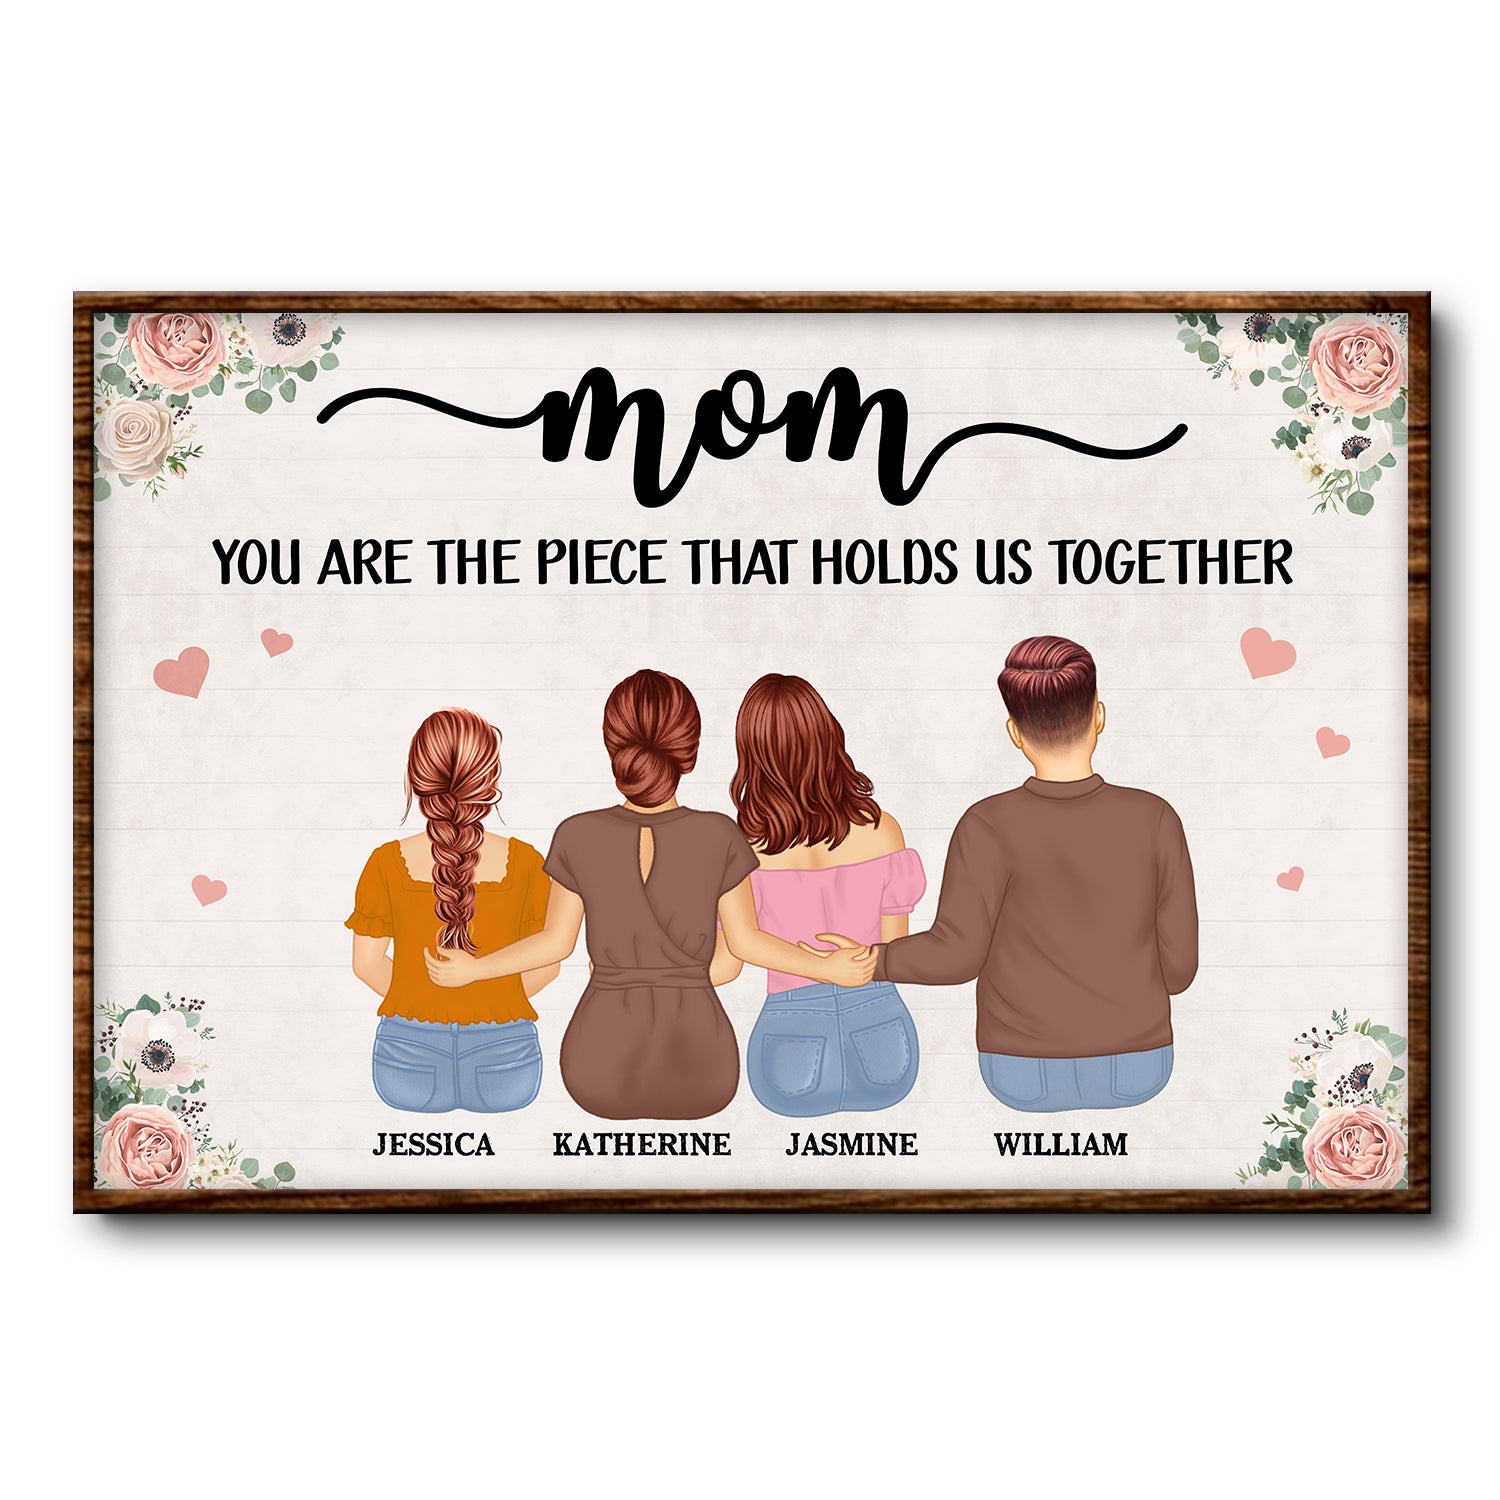 The Piece That Holds Us Together - Gift For Mom, Mother, Grandma - Personalized Poster